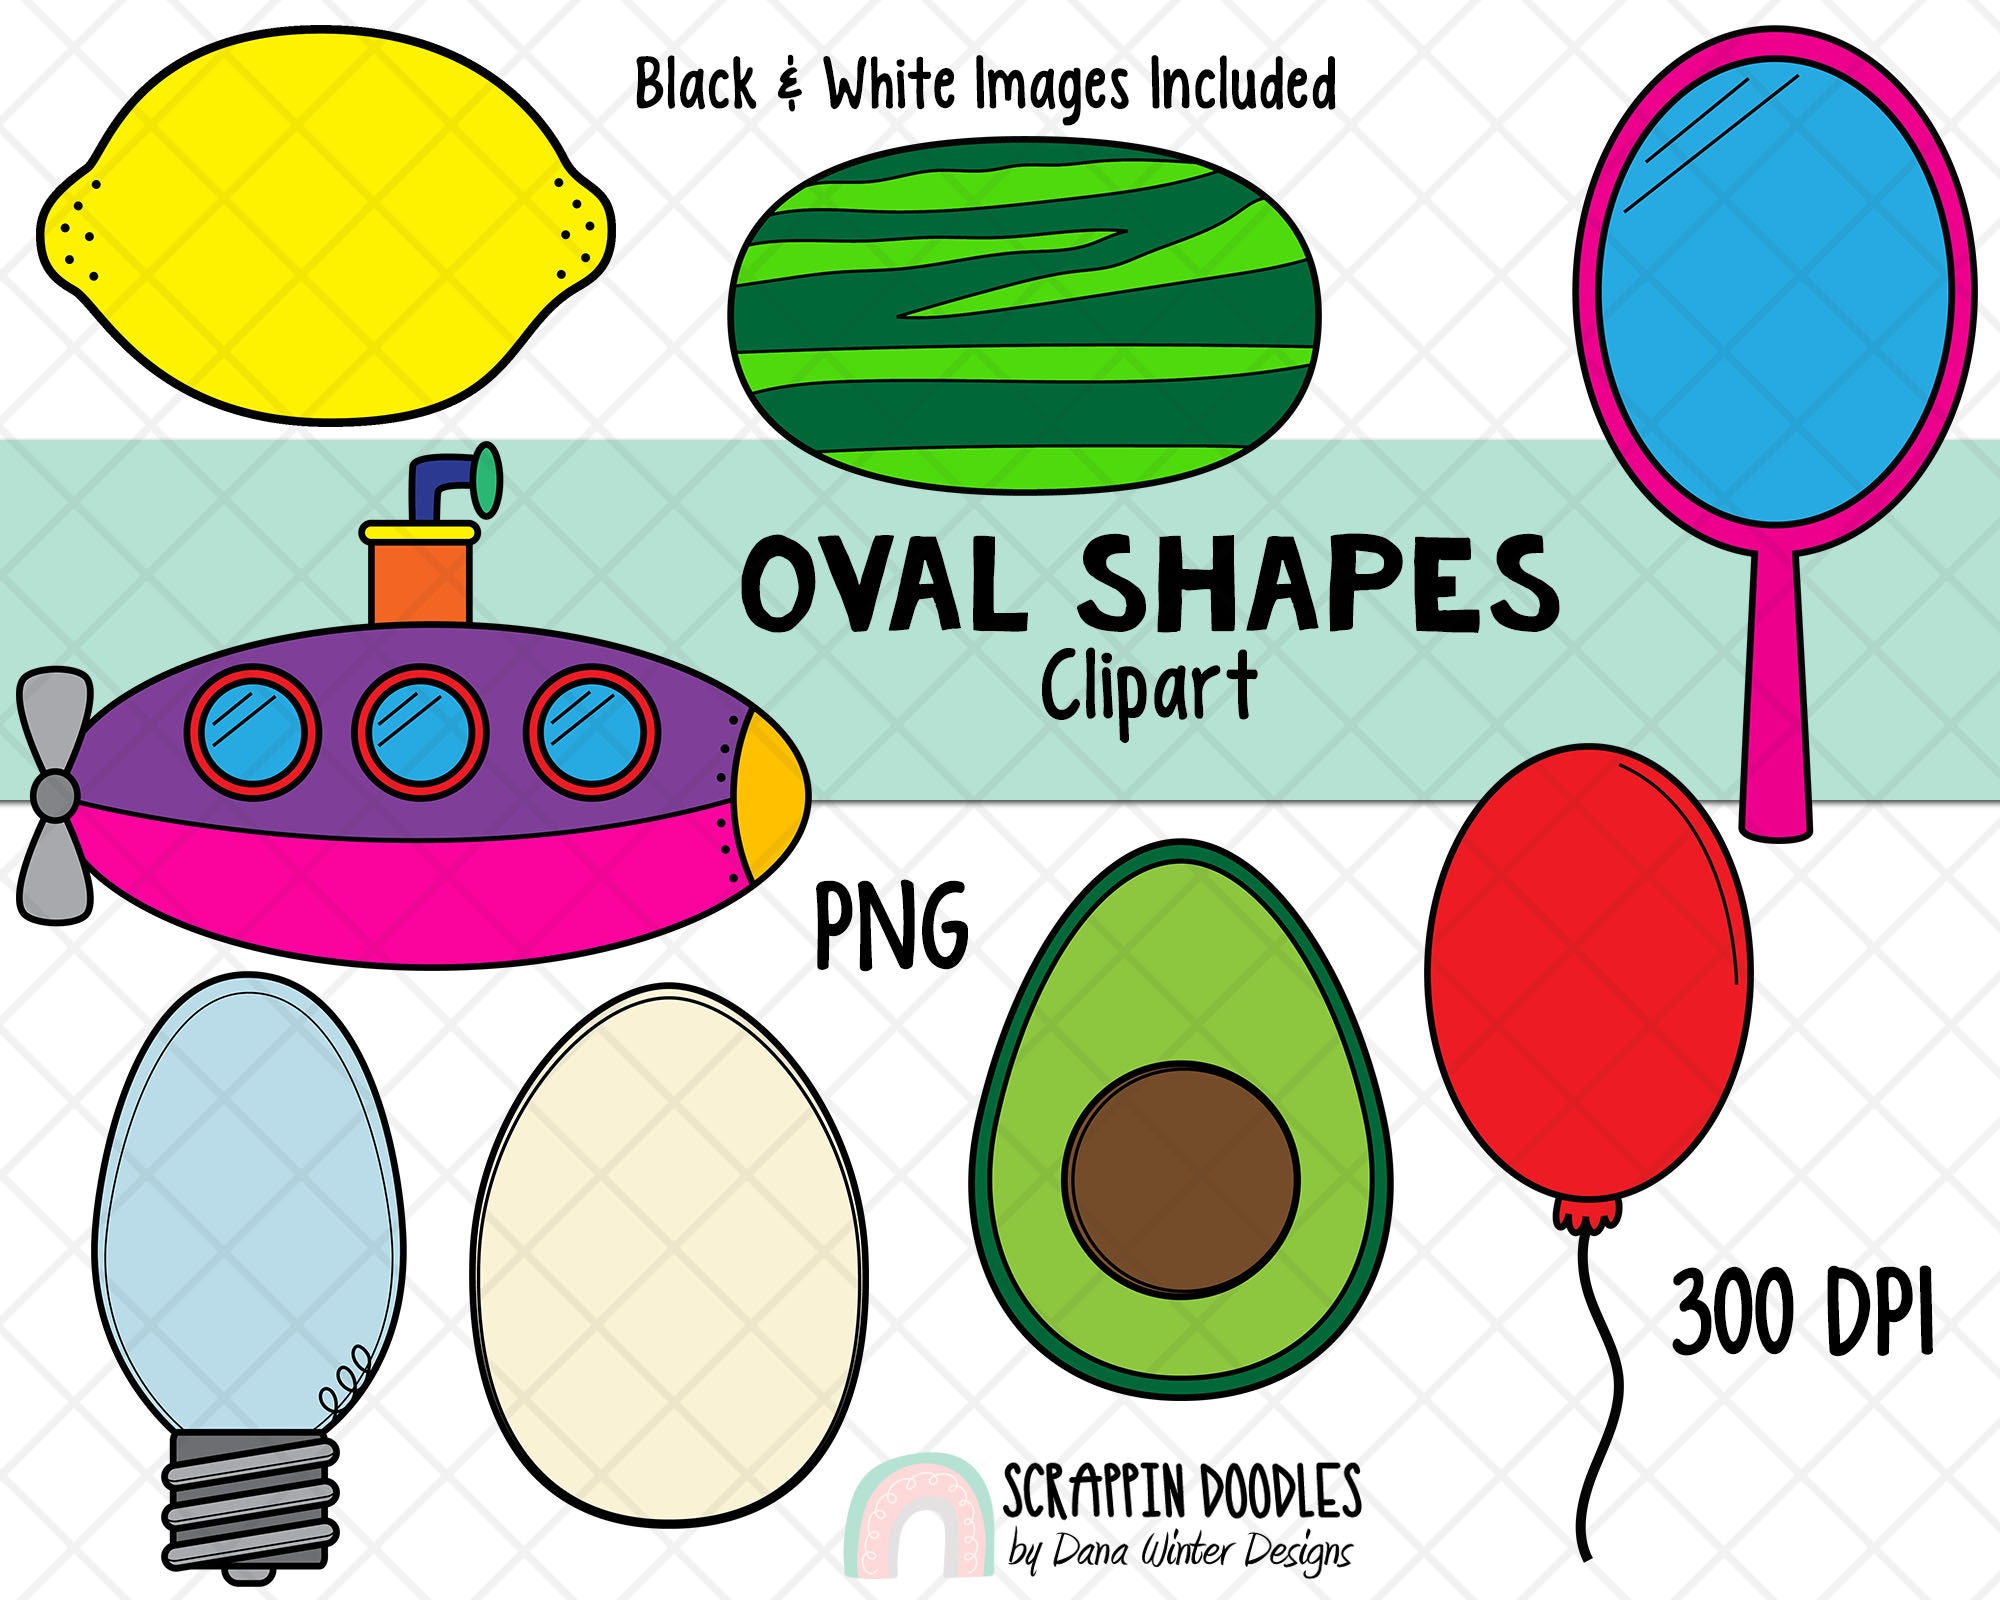 Pictures Of Oval Shaped Objects